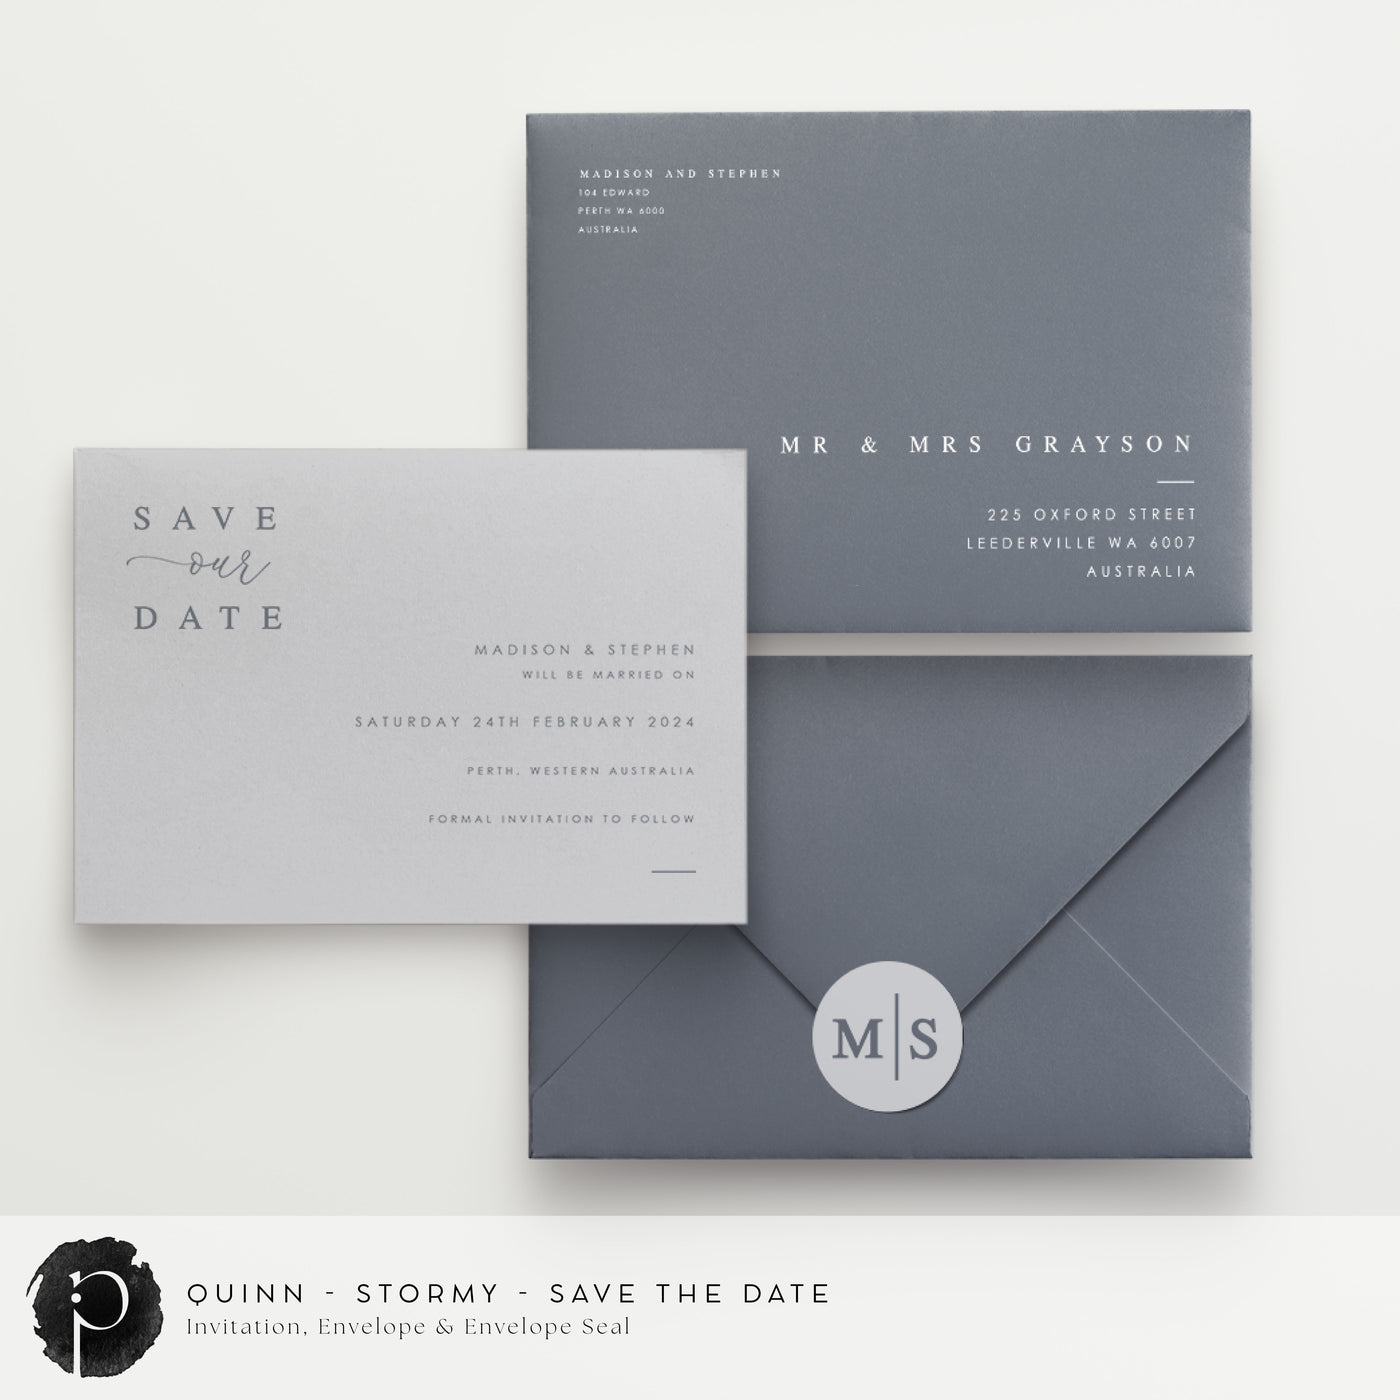 Quinn - Save The Date Cards